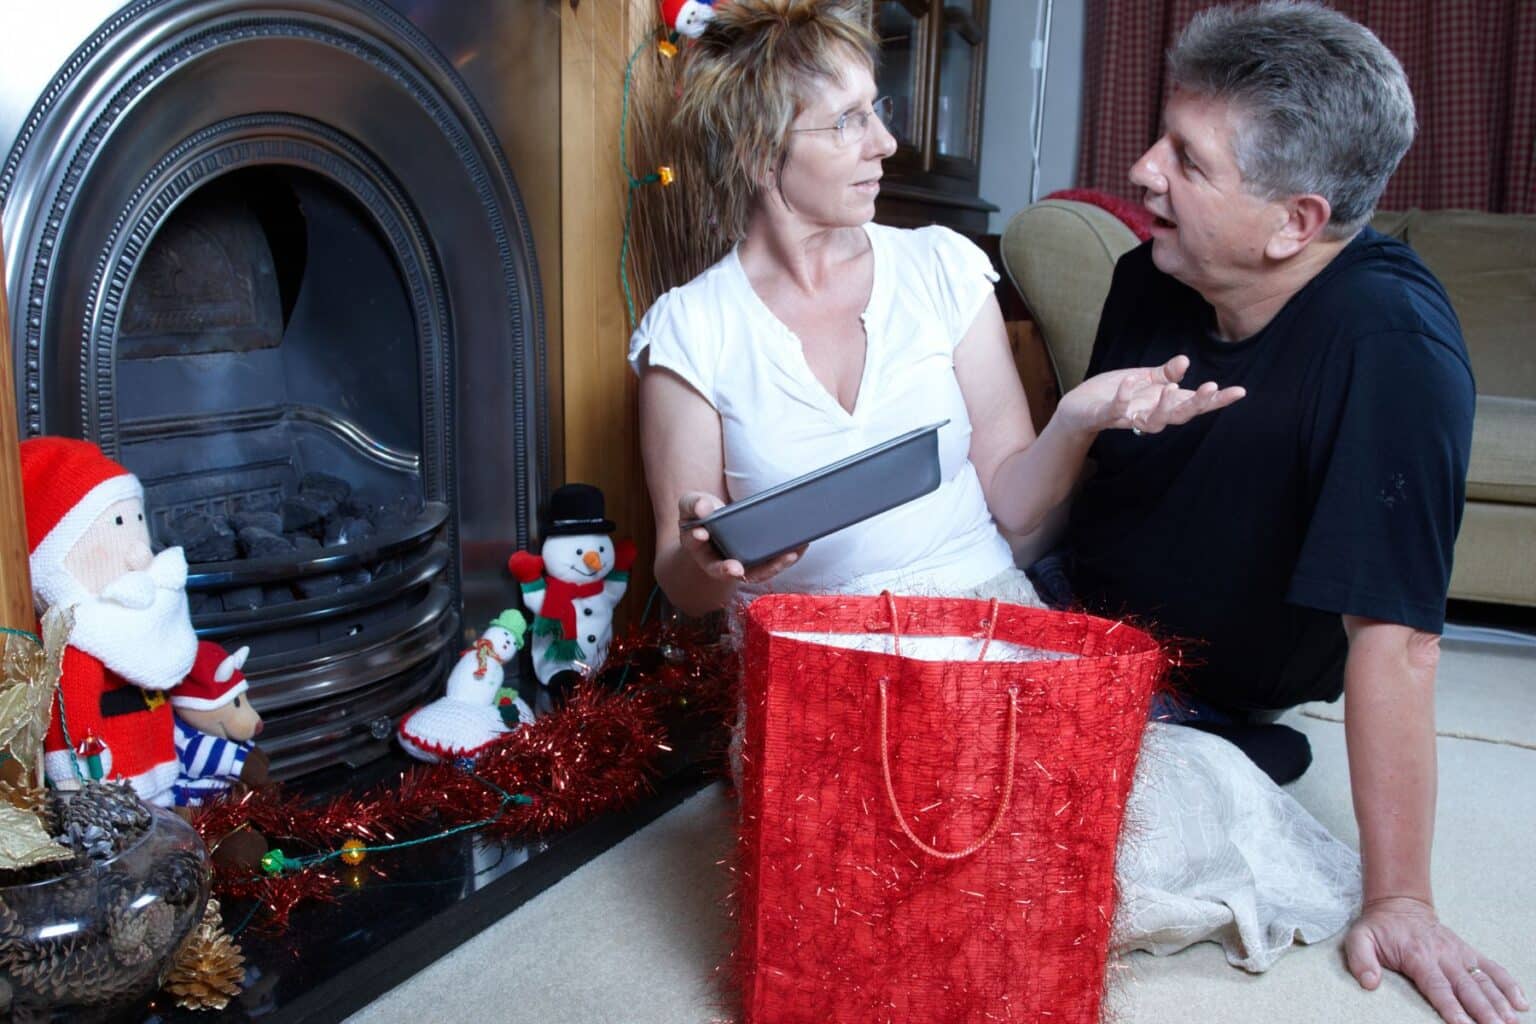 woman unhappy with the gift her husband gave her